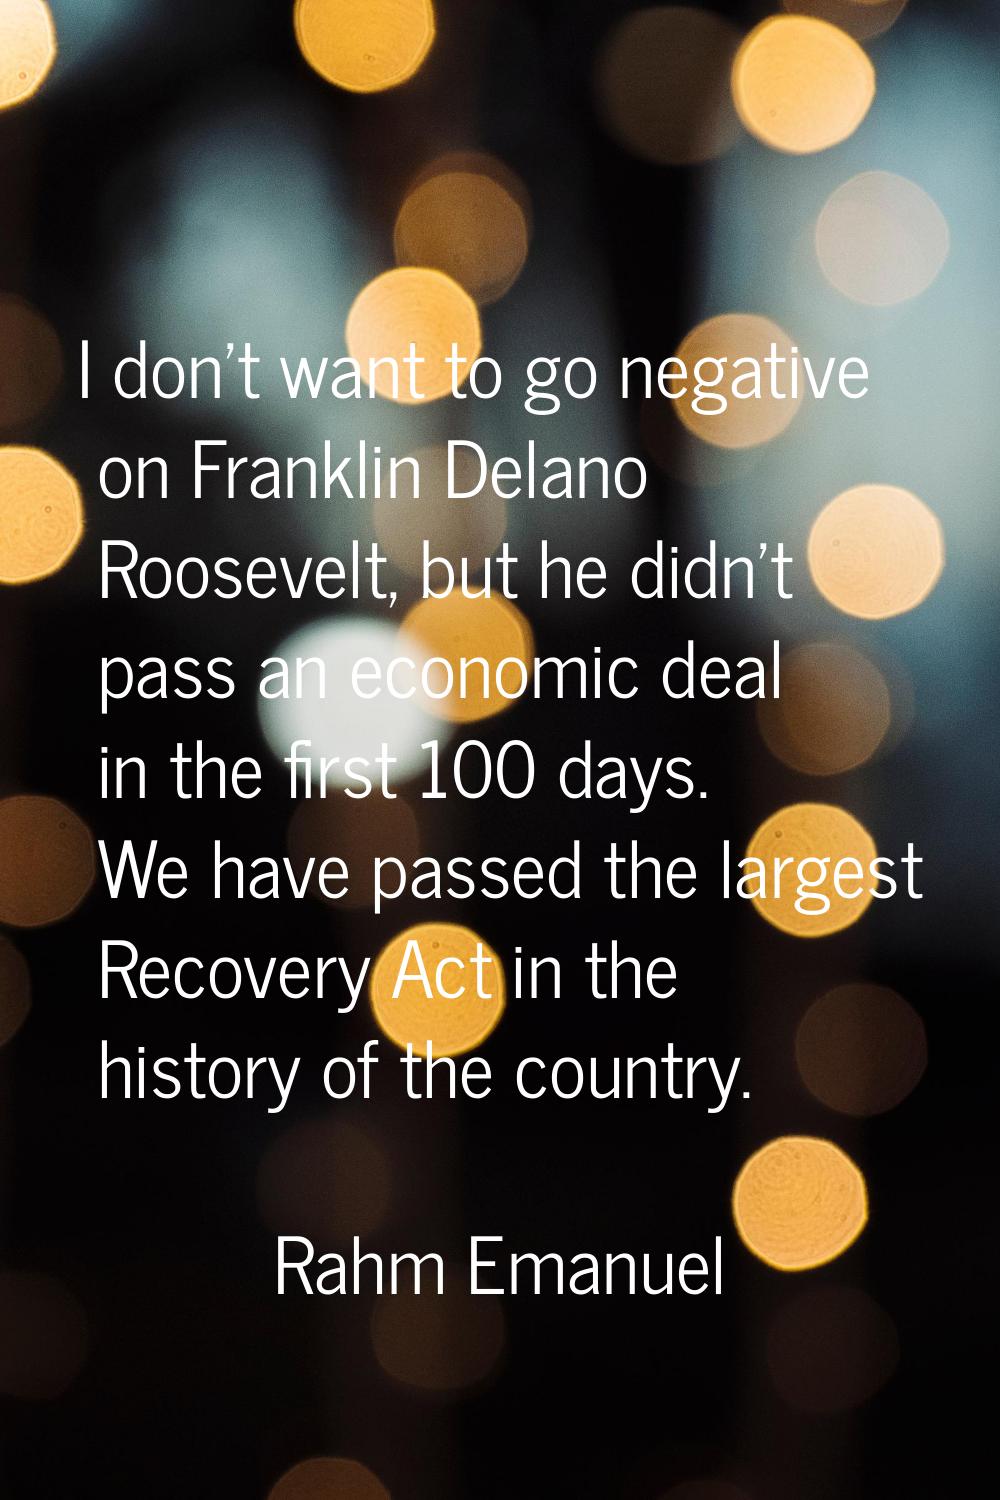 I don't want to go negative on Franklin Delano Roosevelt, but he didn't pass an economic deal in th